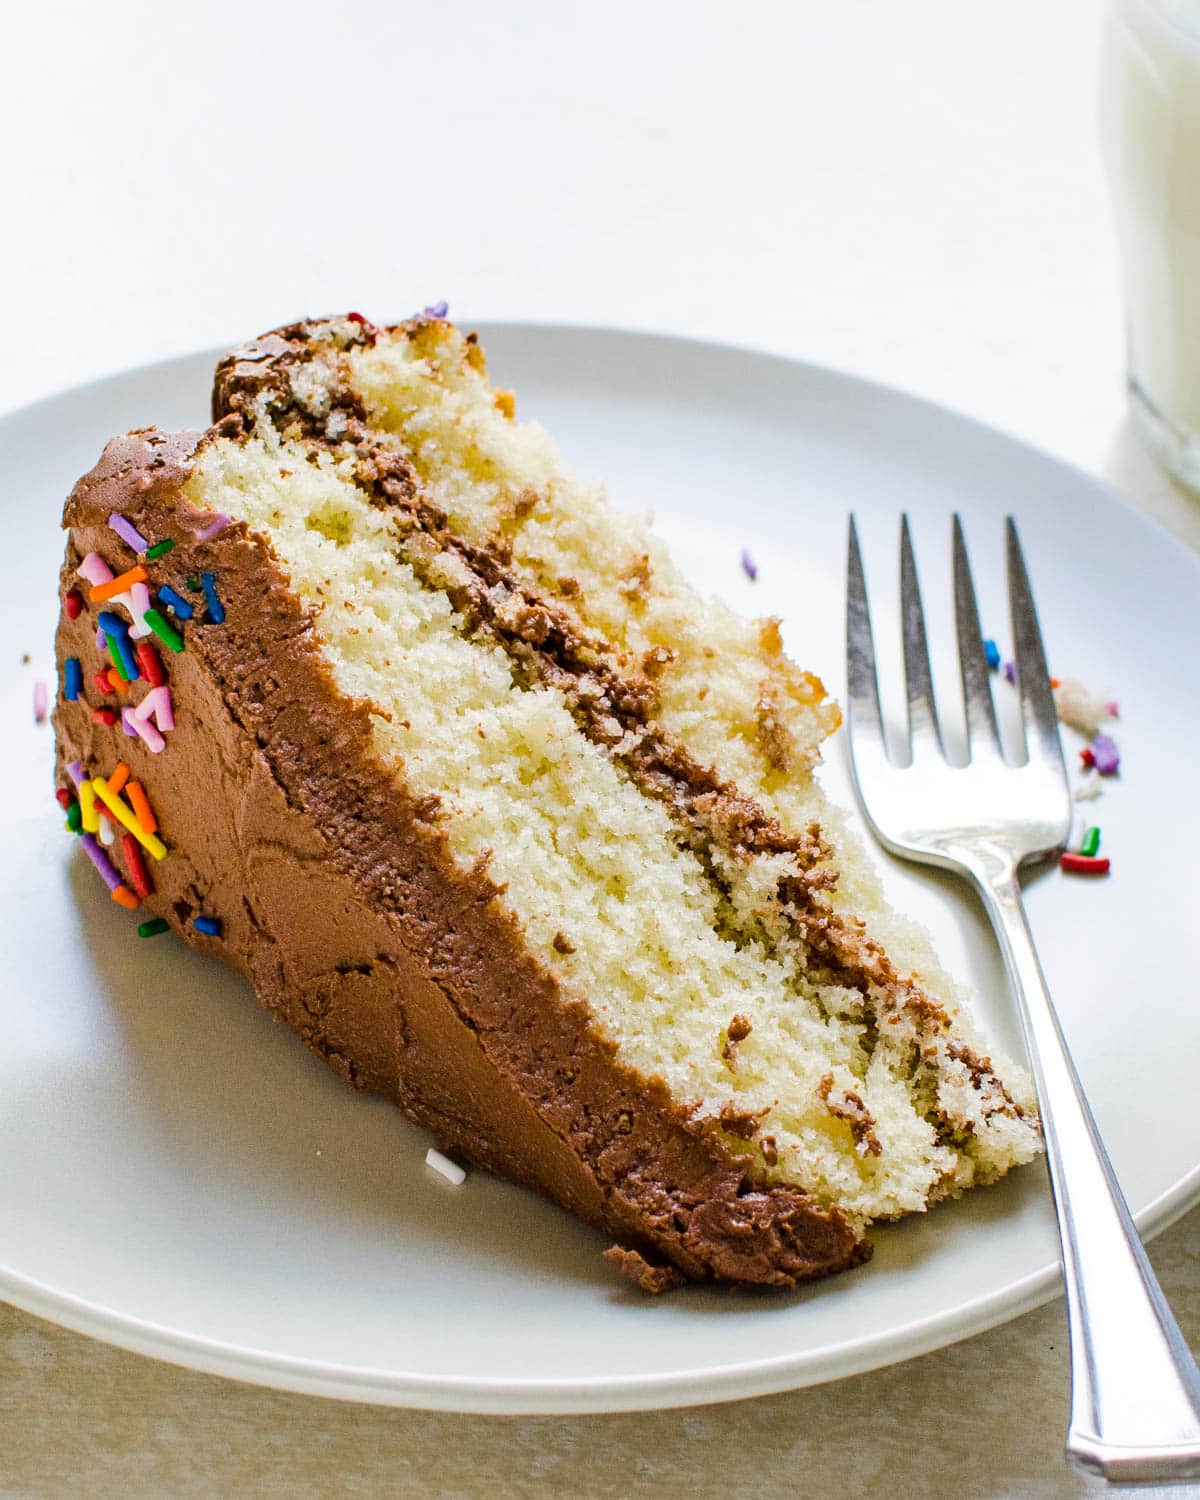 A slice of yellow cake with chocolate frosting and sprinkles.